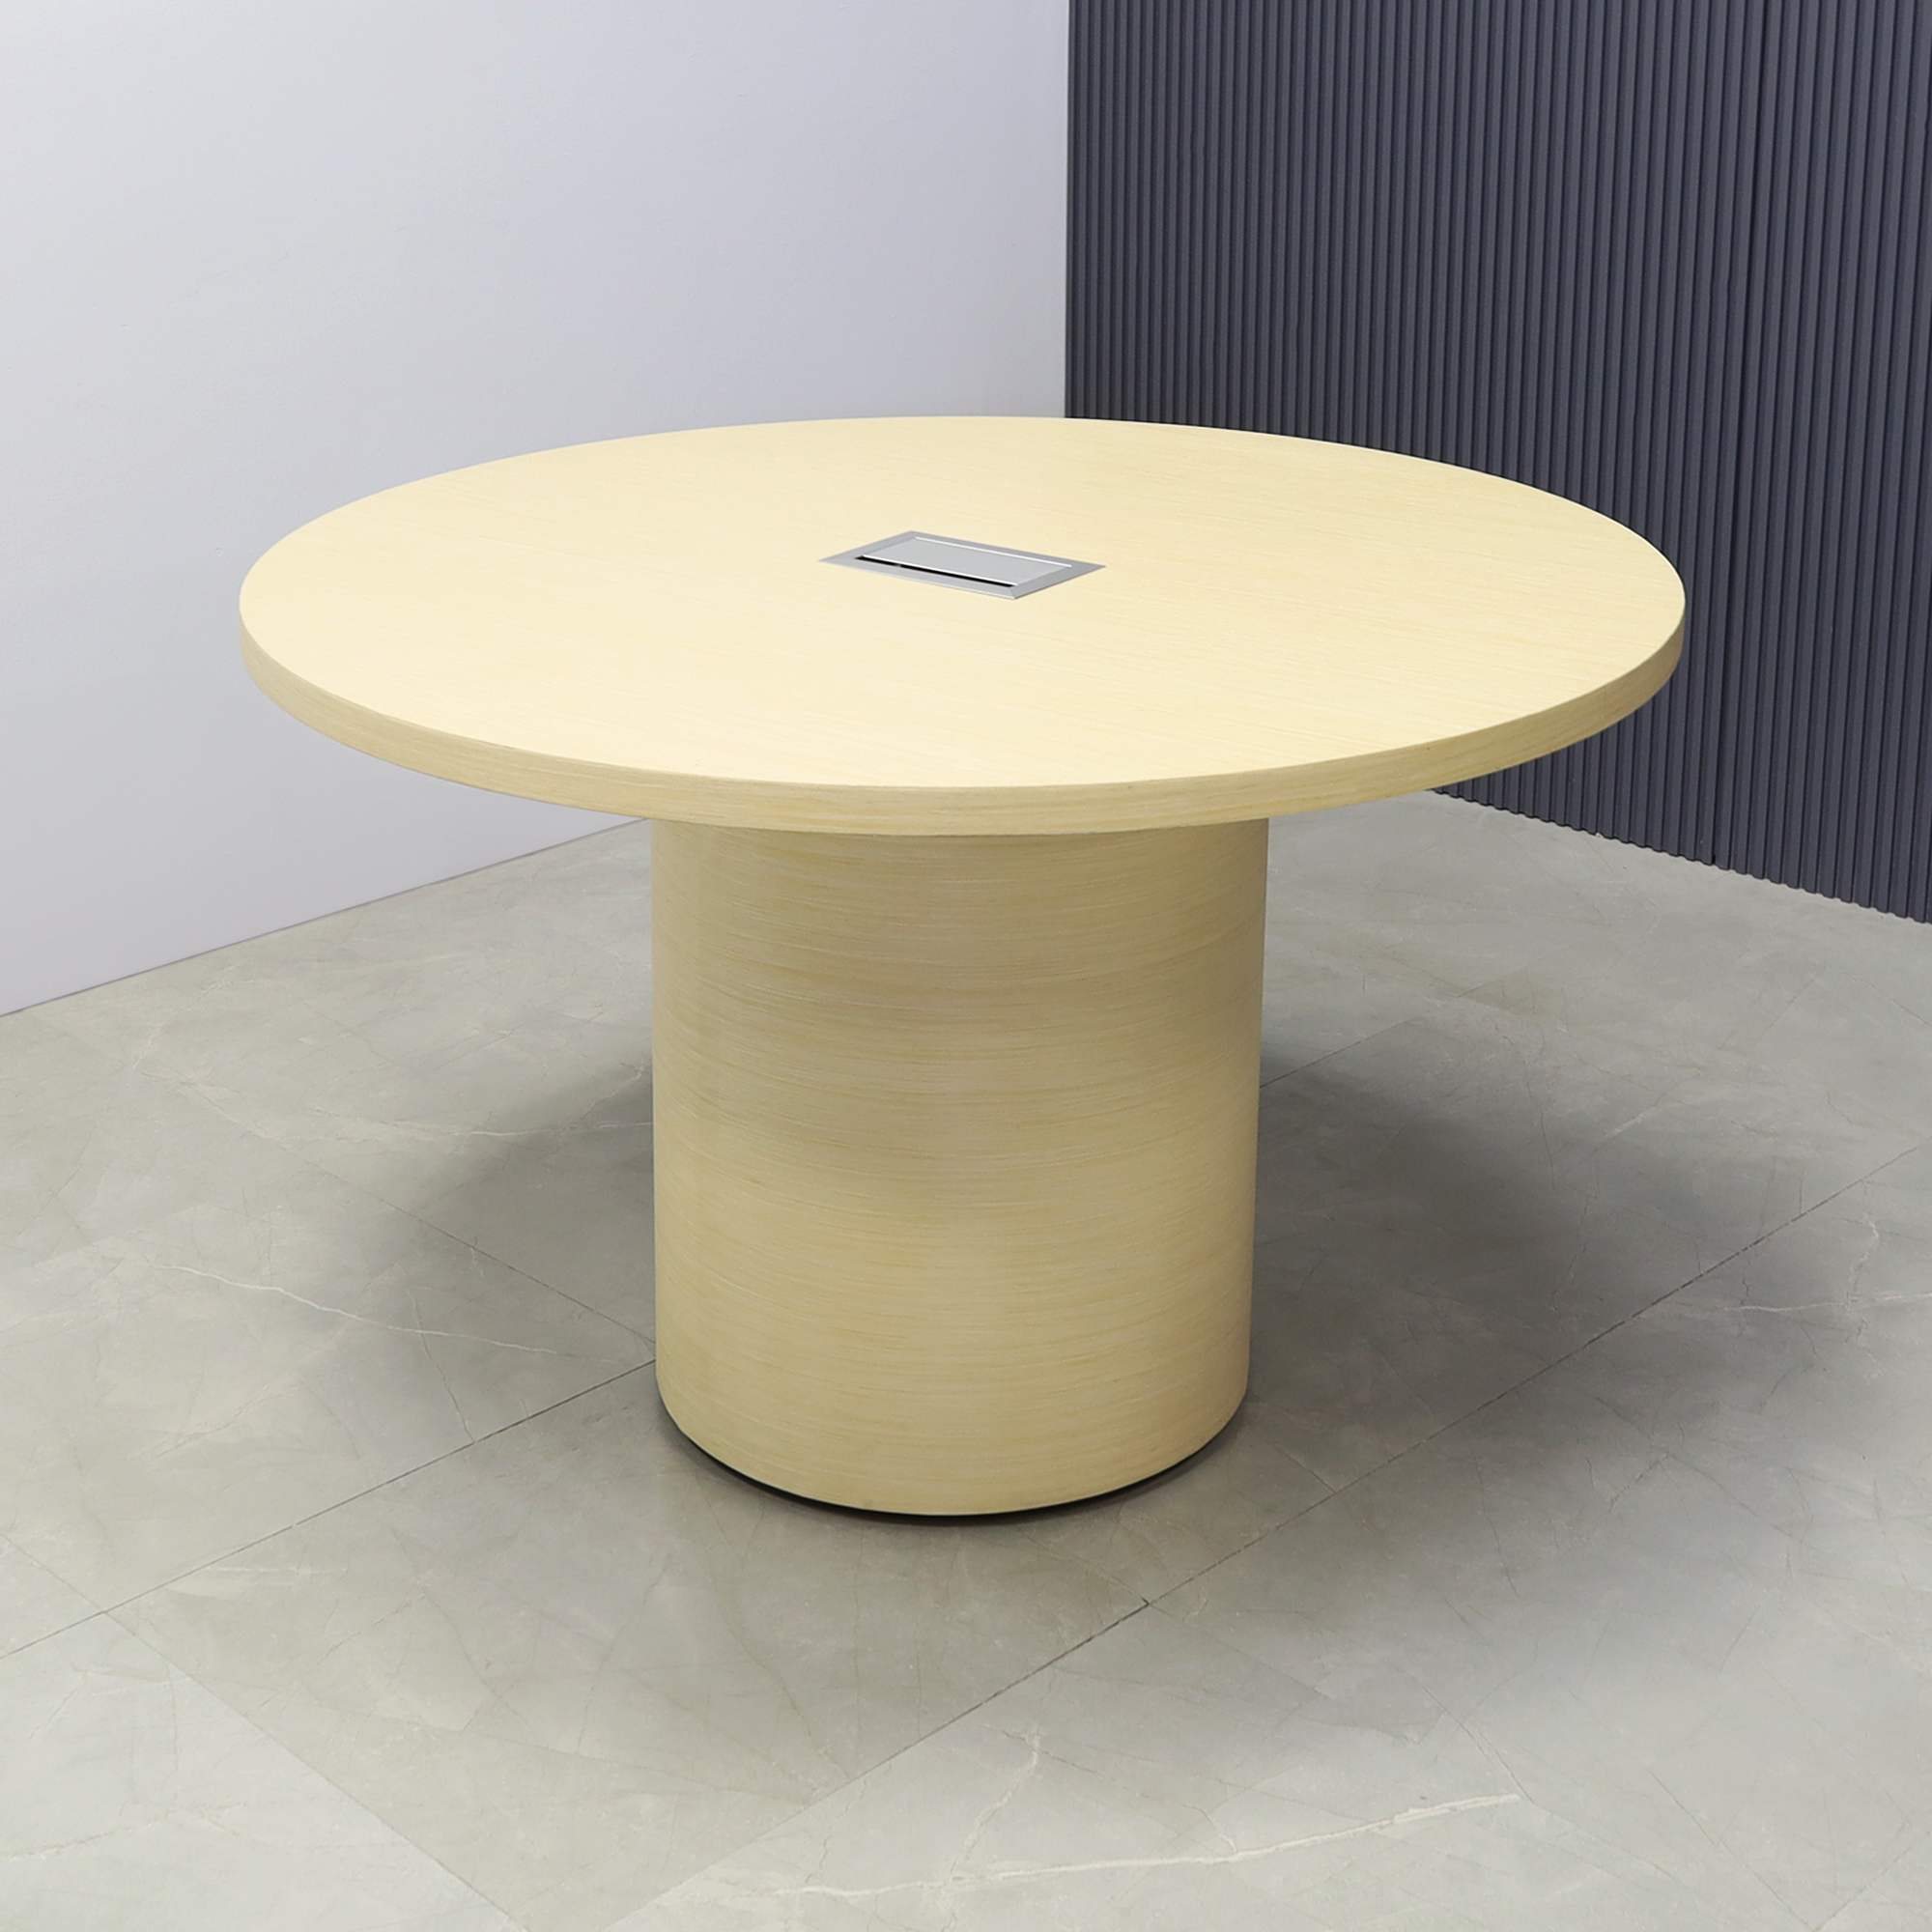 48-inch Newton Round Conference Table in maple veneer top and base, with silver MX3 powerbox, shown here.